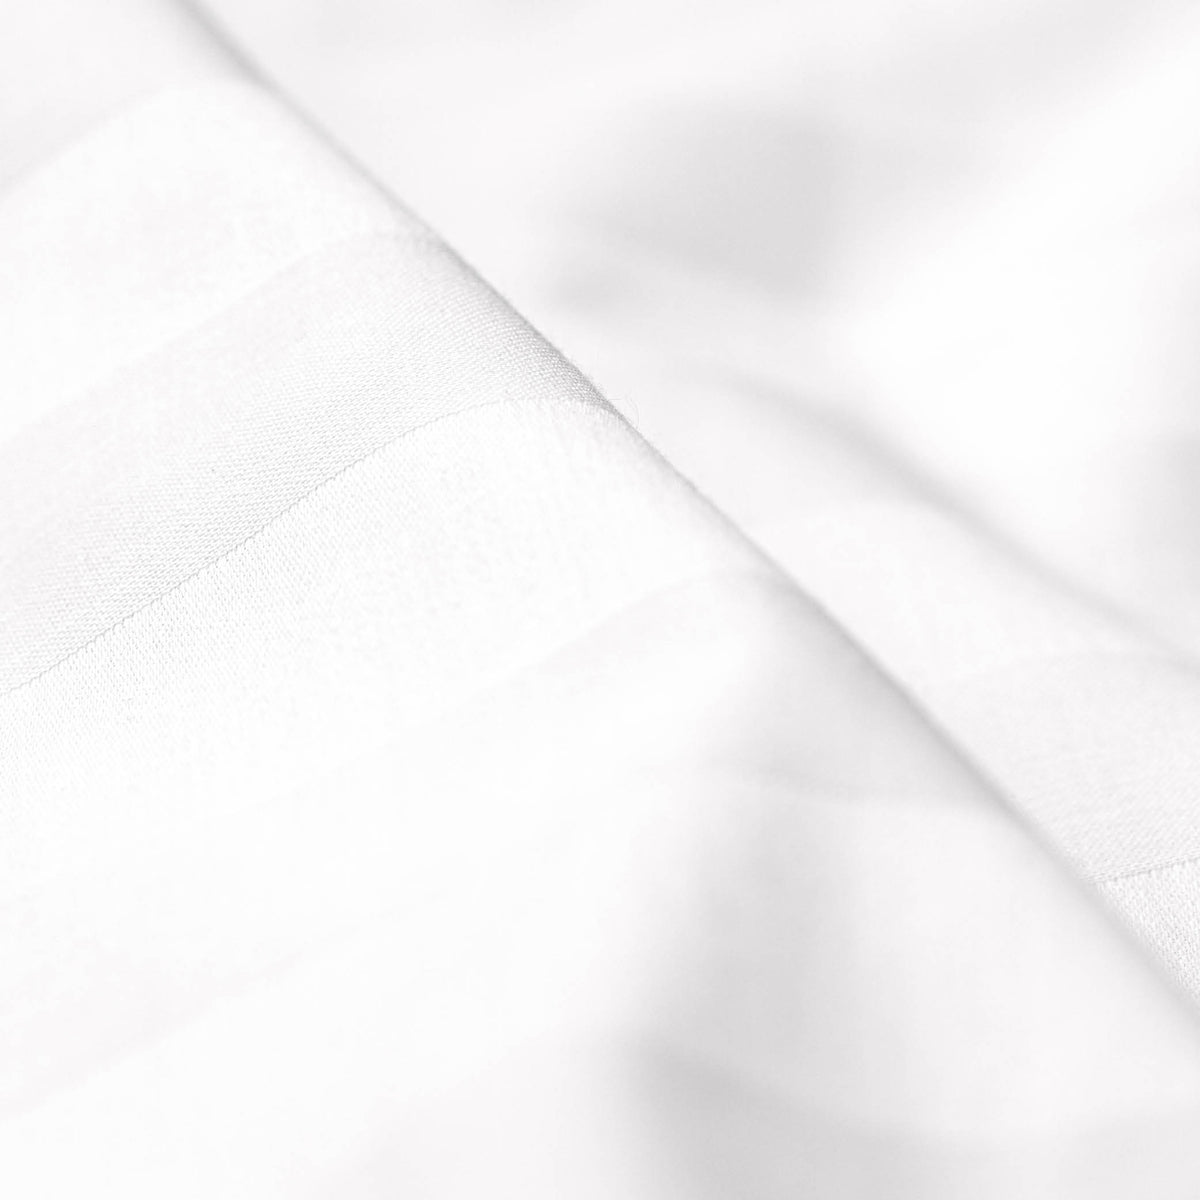 Close-up image of the Luxury Resort Hotel Collection Classic Cotton Pillowcase showcasing the white pinstripe pattern